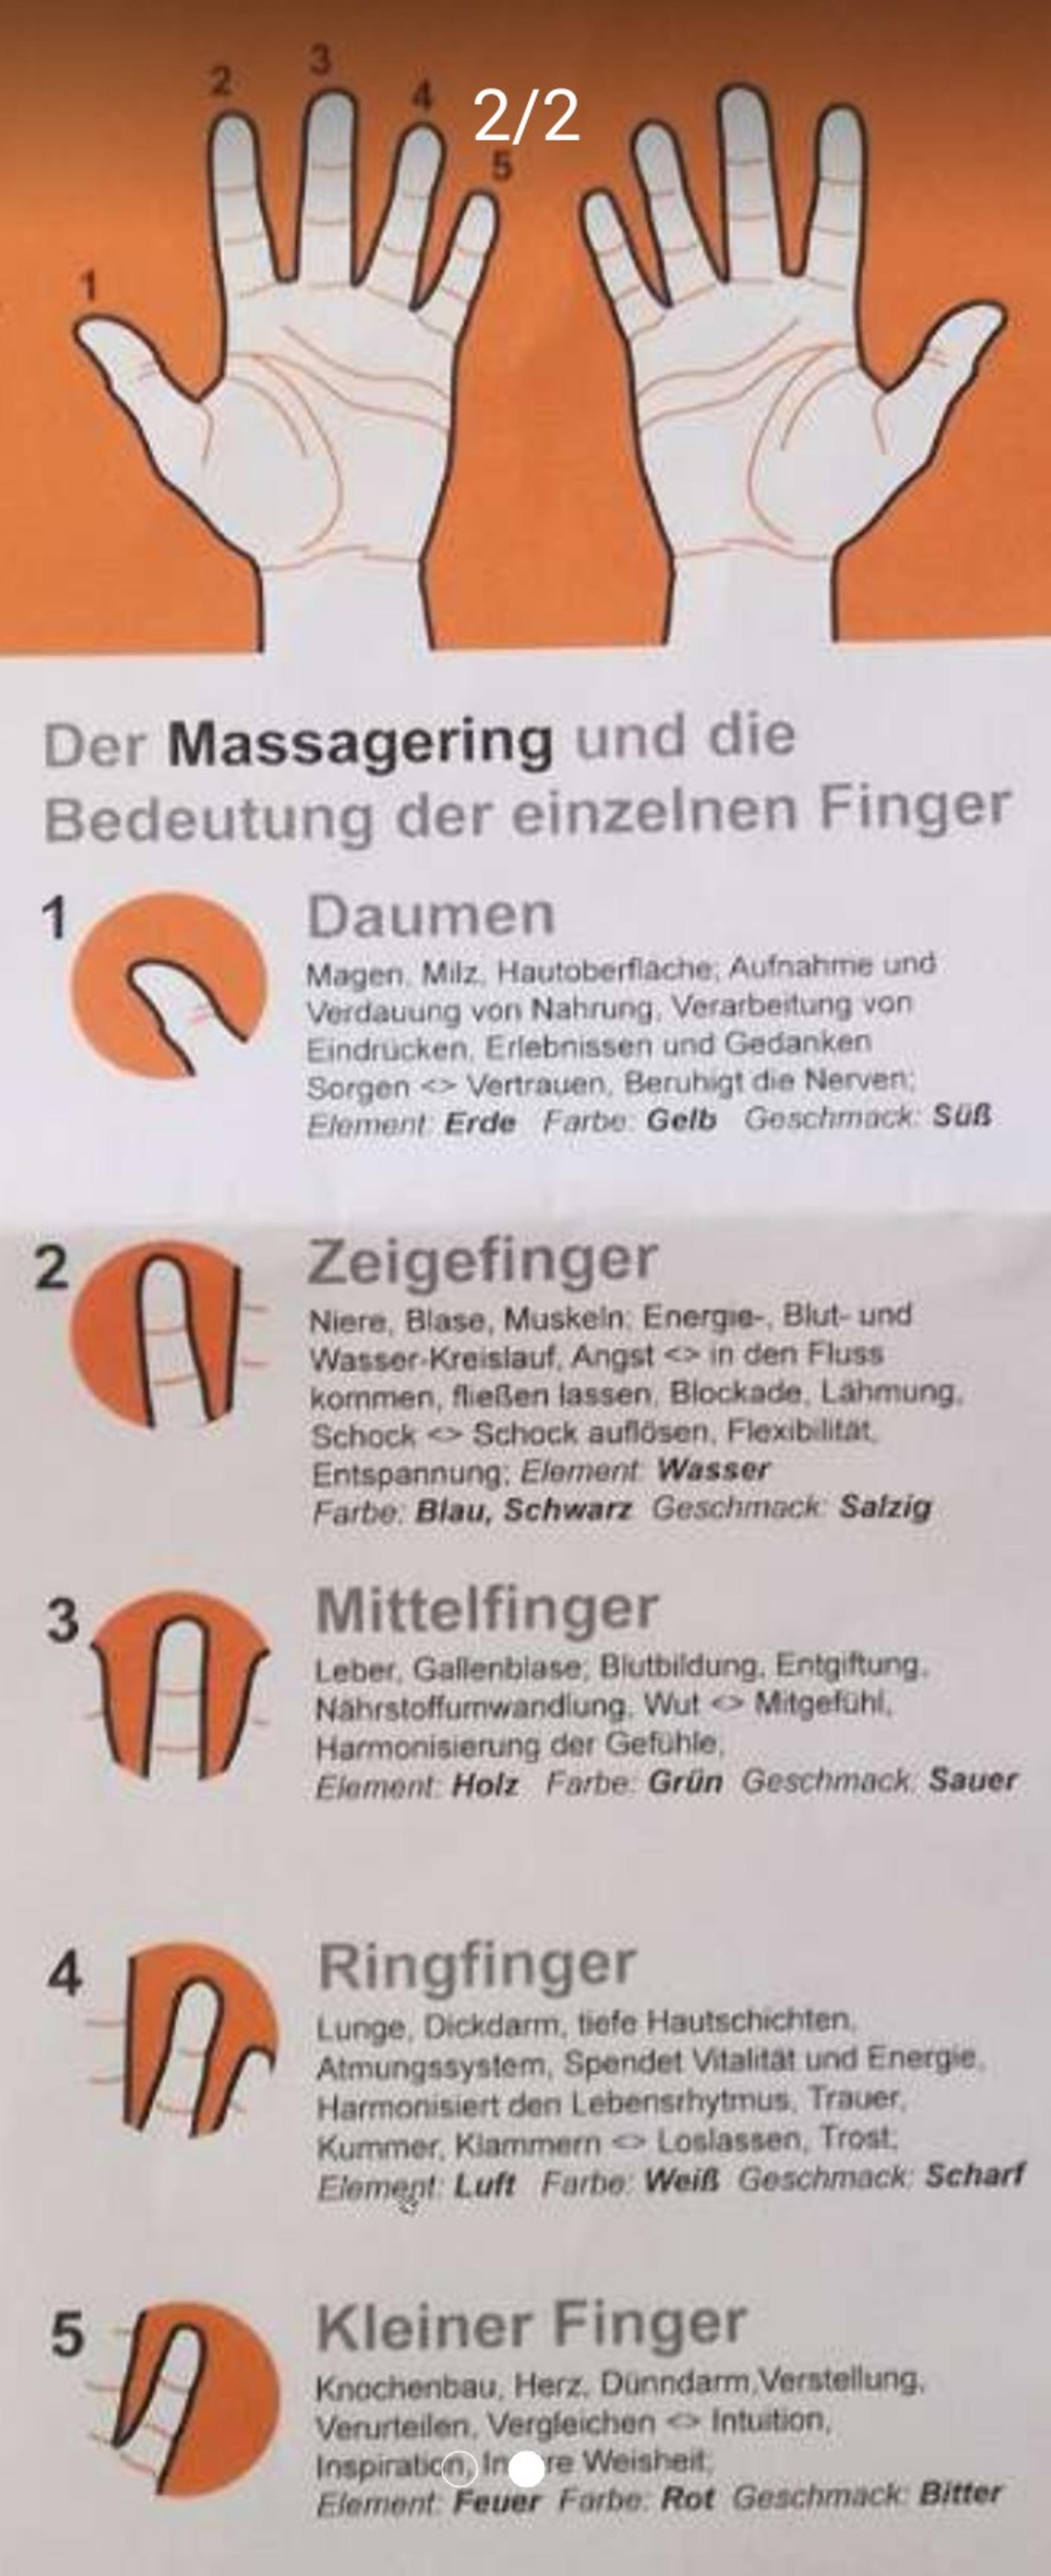 Ring finger bedeutung am Causes of